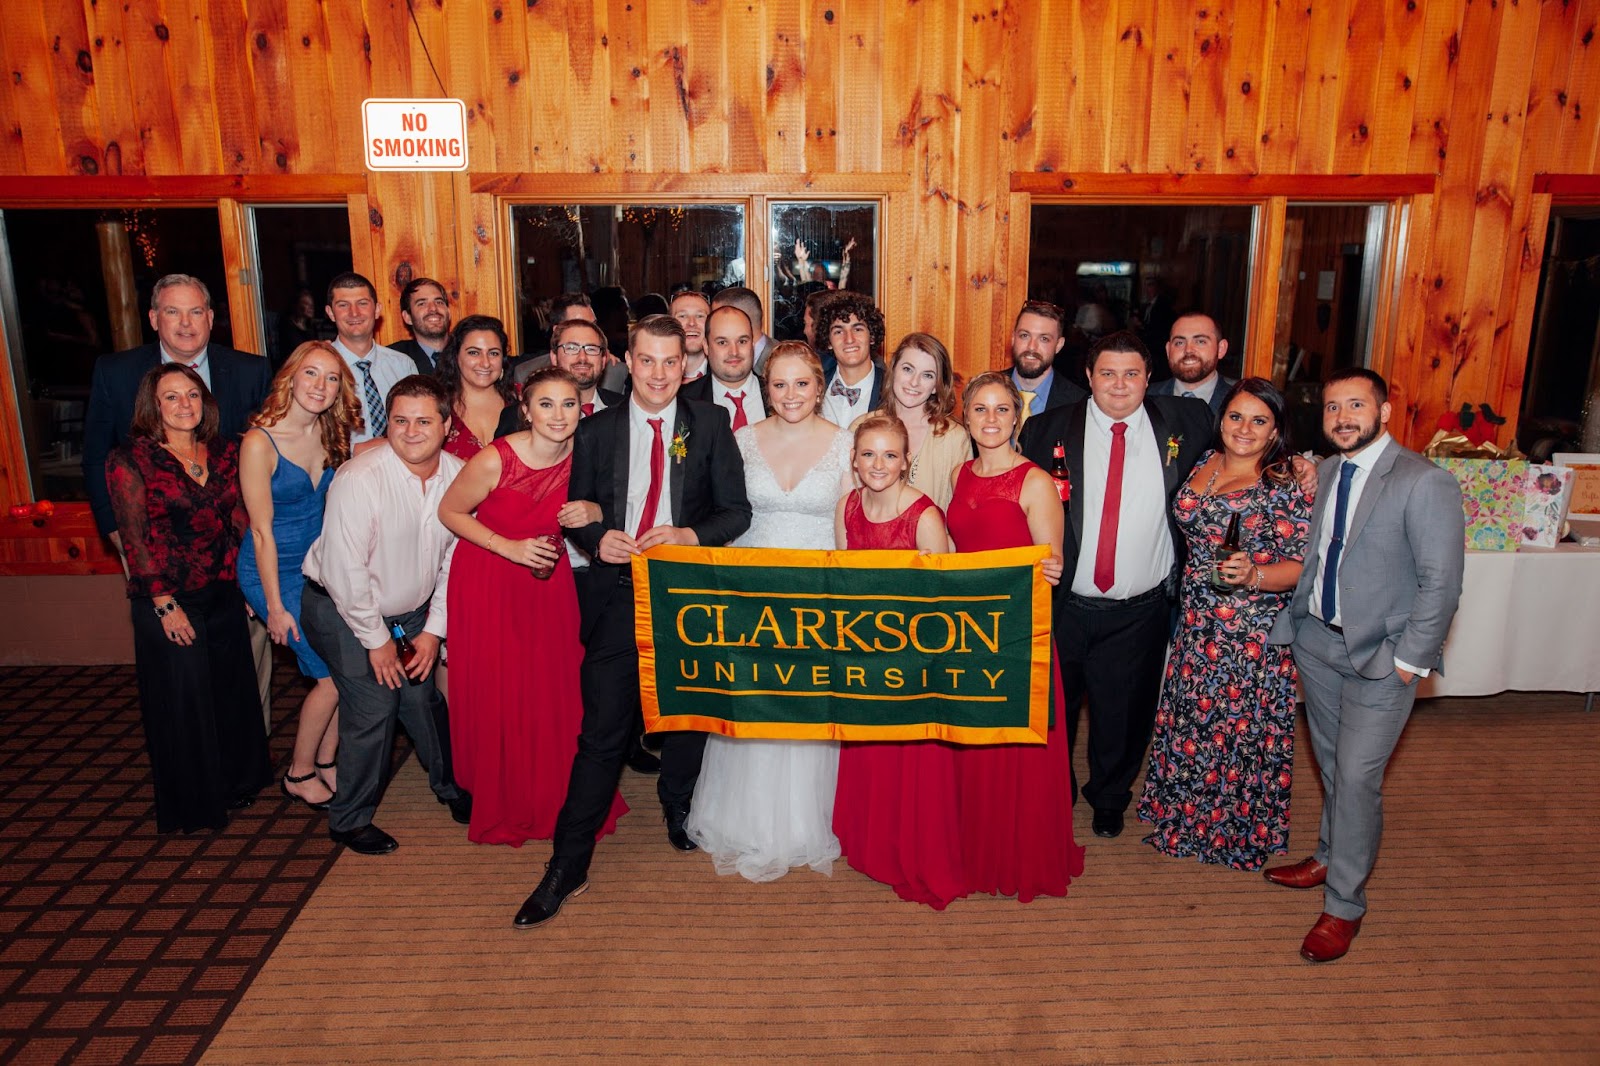 The Wedding party and guests standing behind a bride and groom while holding up a Clarkson University flag